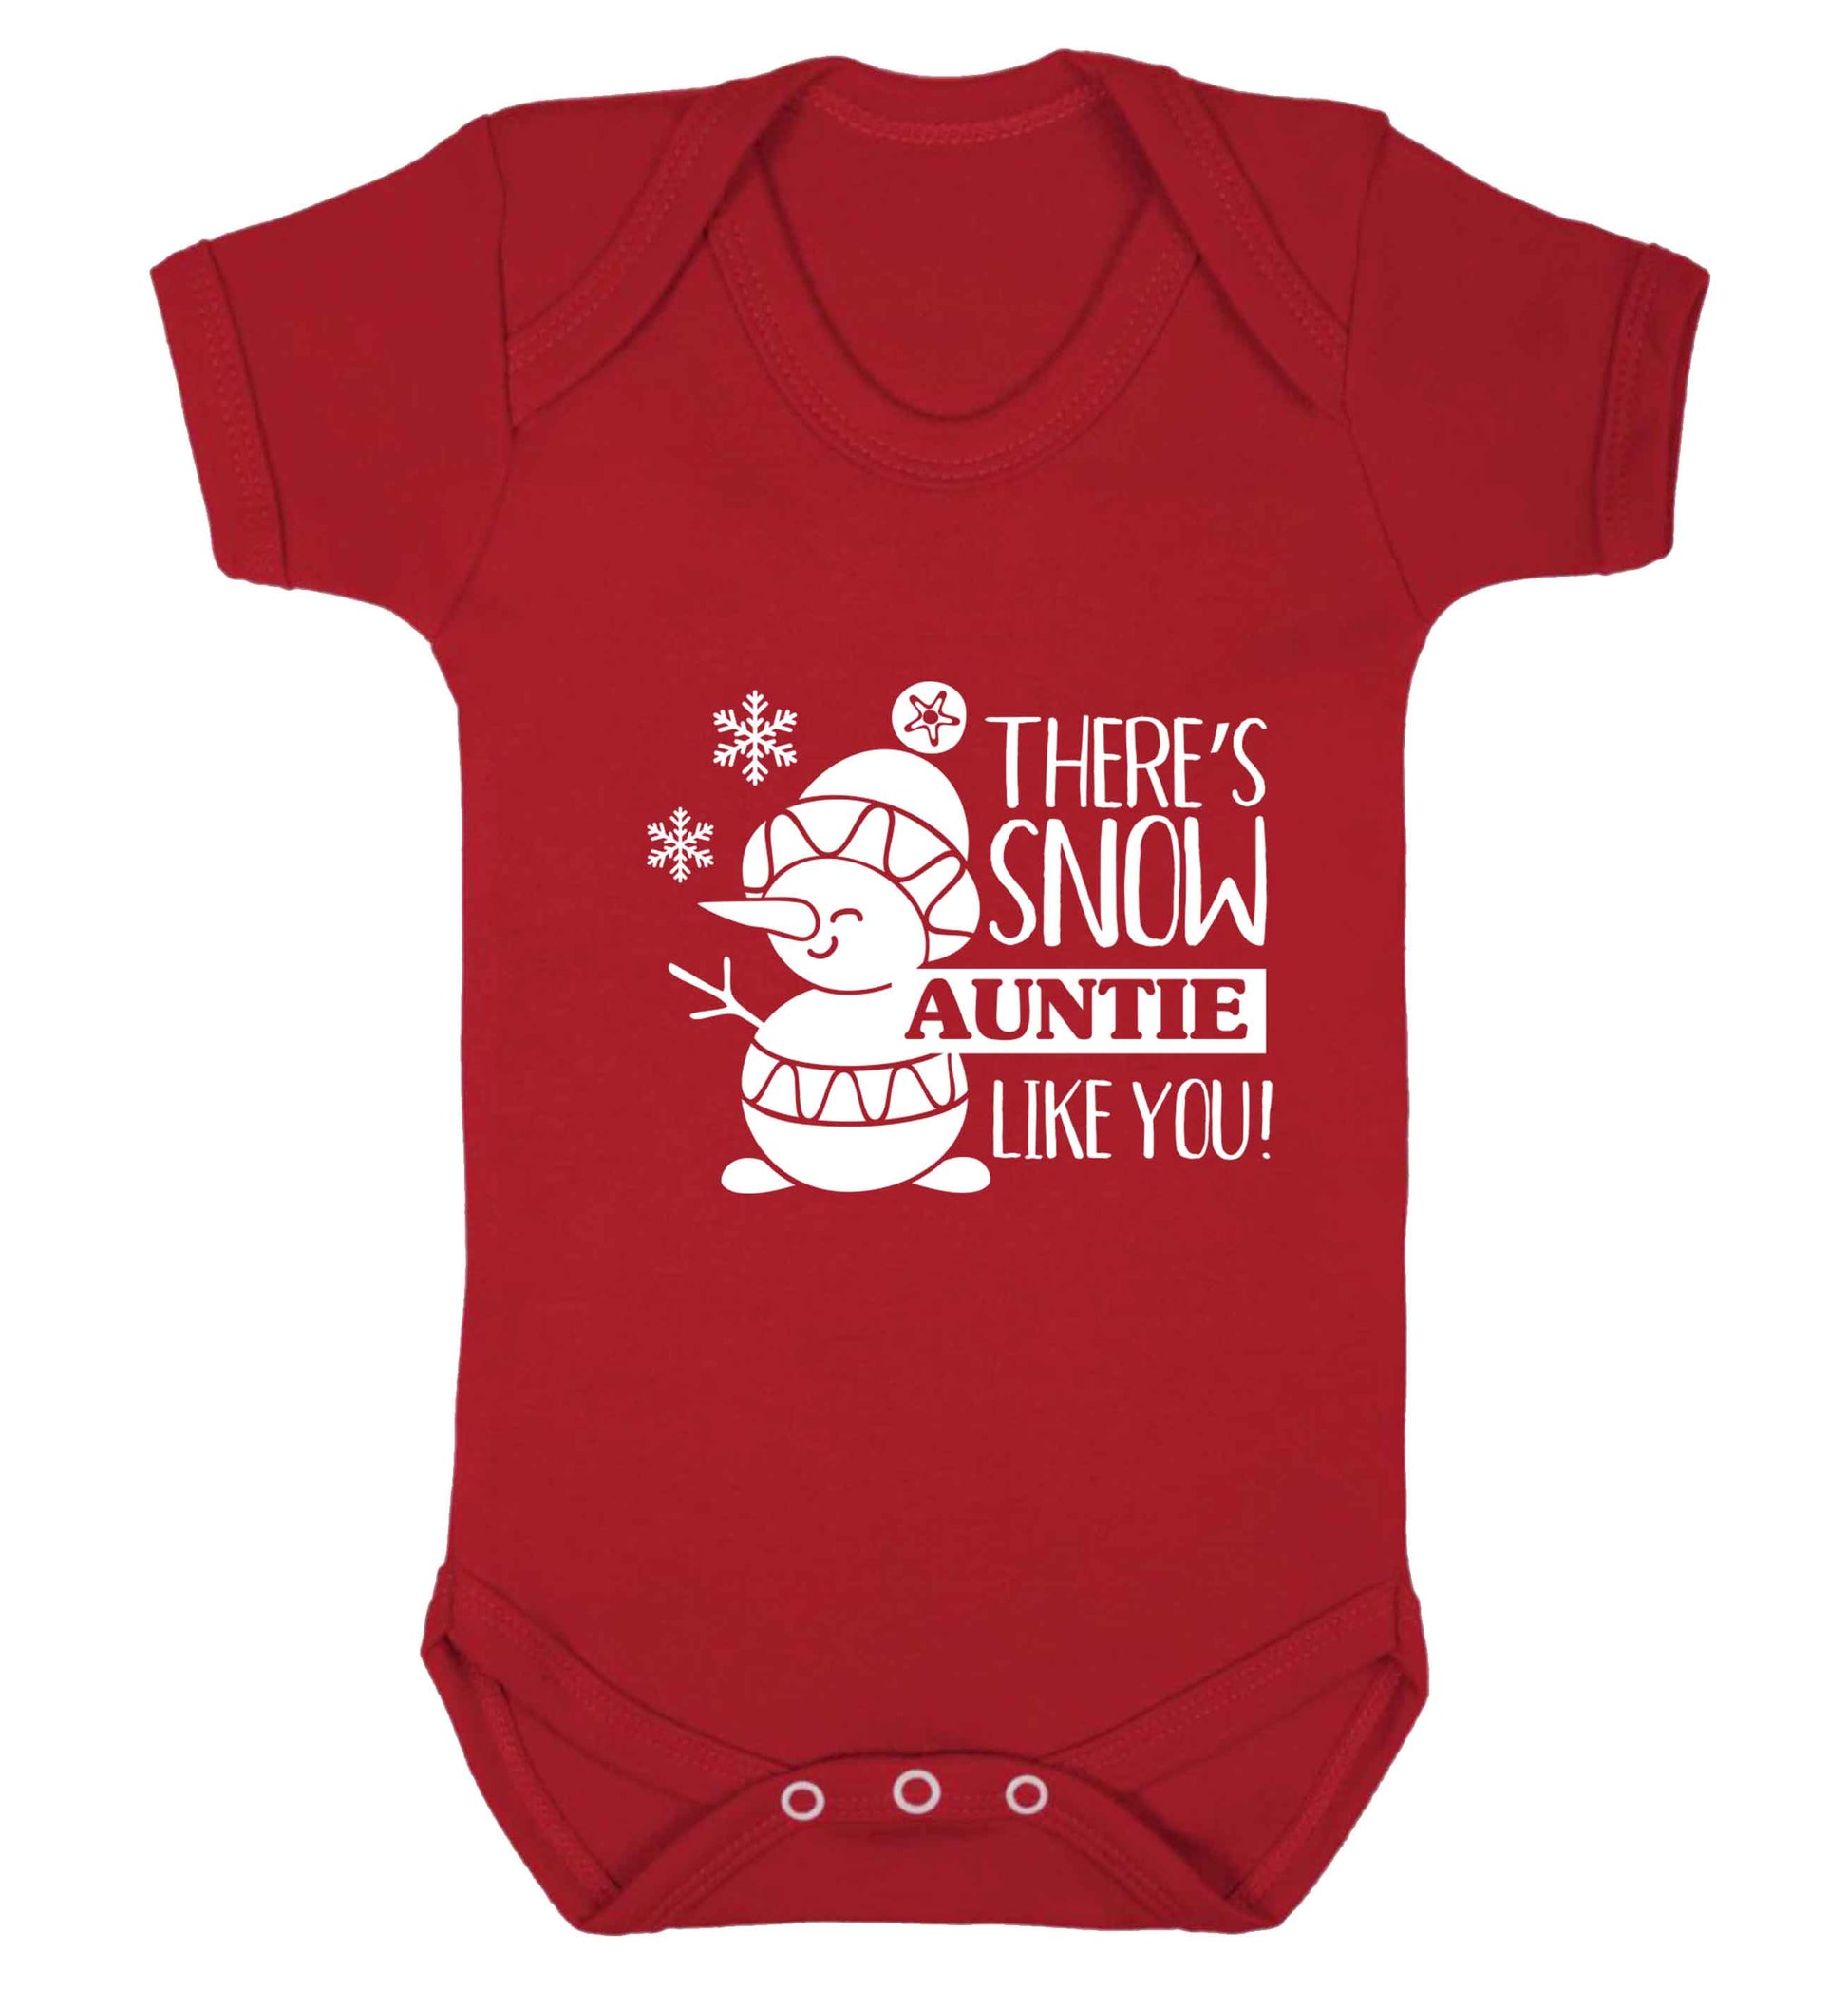 There's snow auntie like you baby vest red 18-24 months